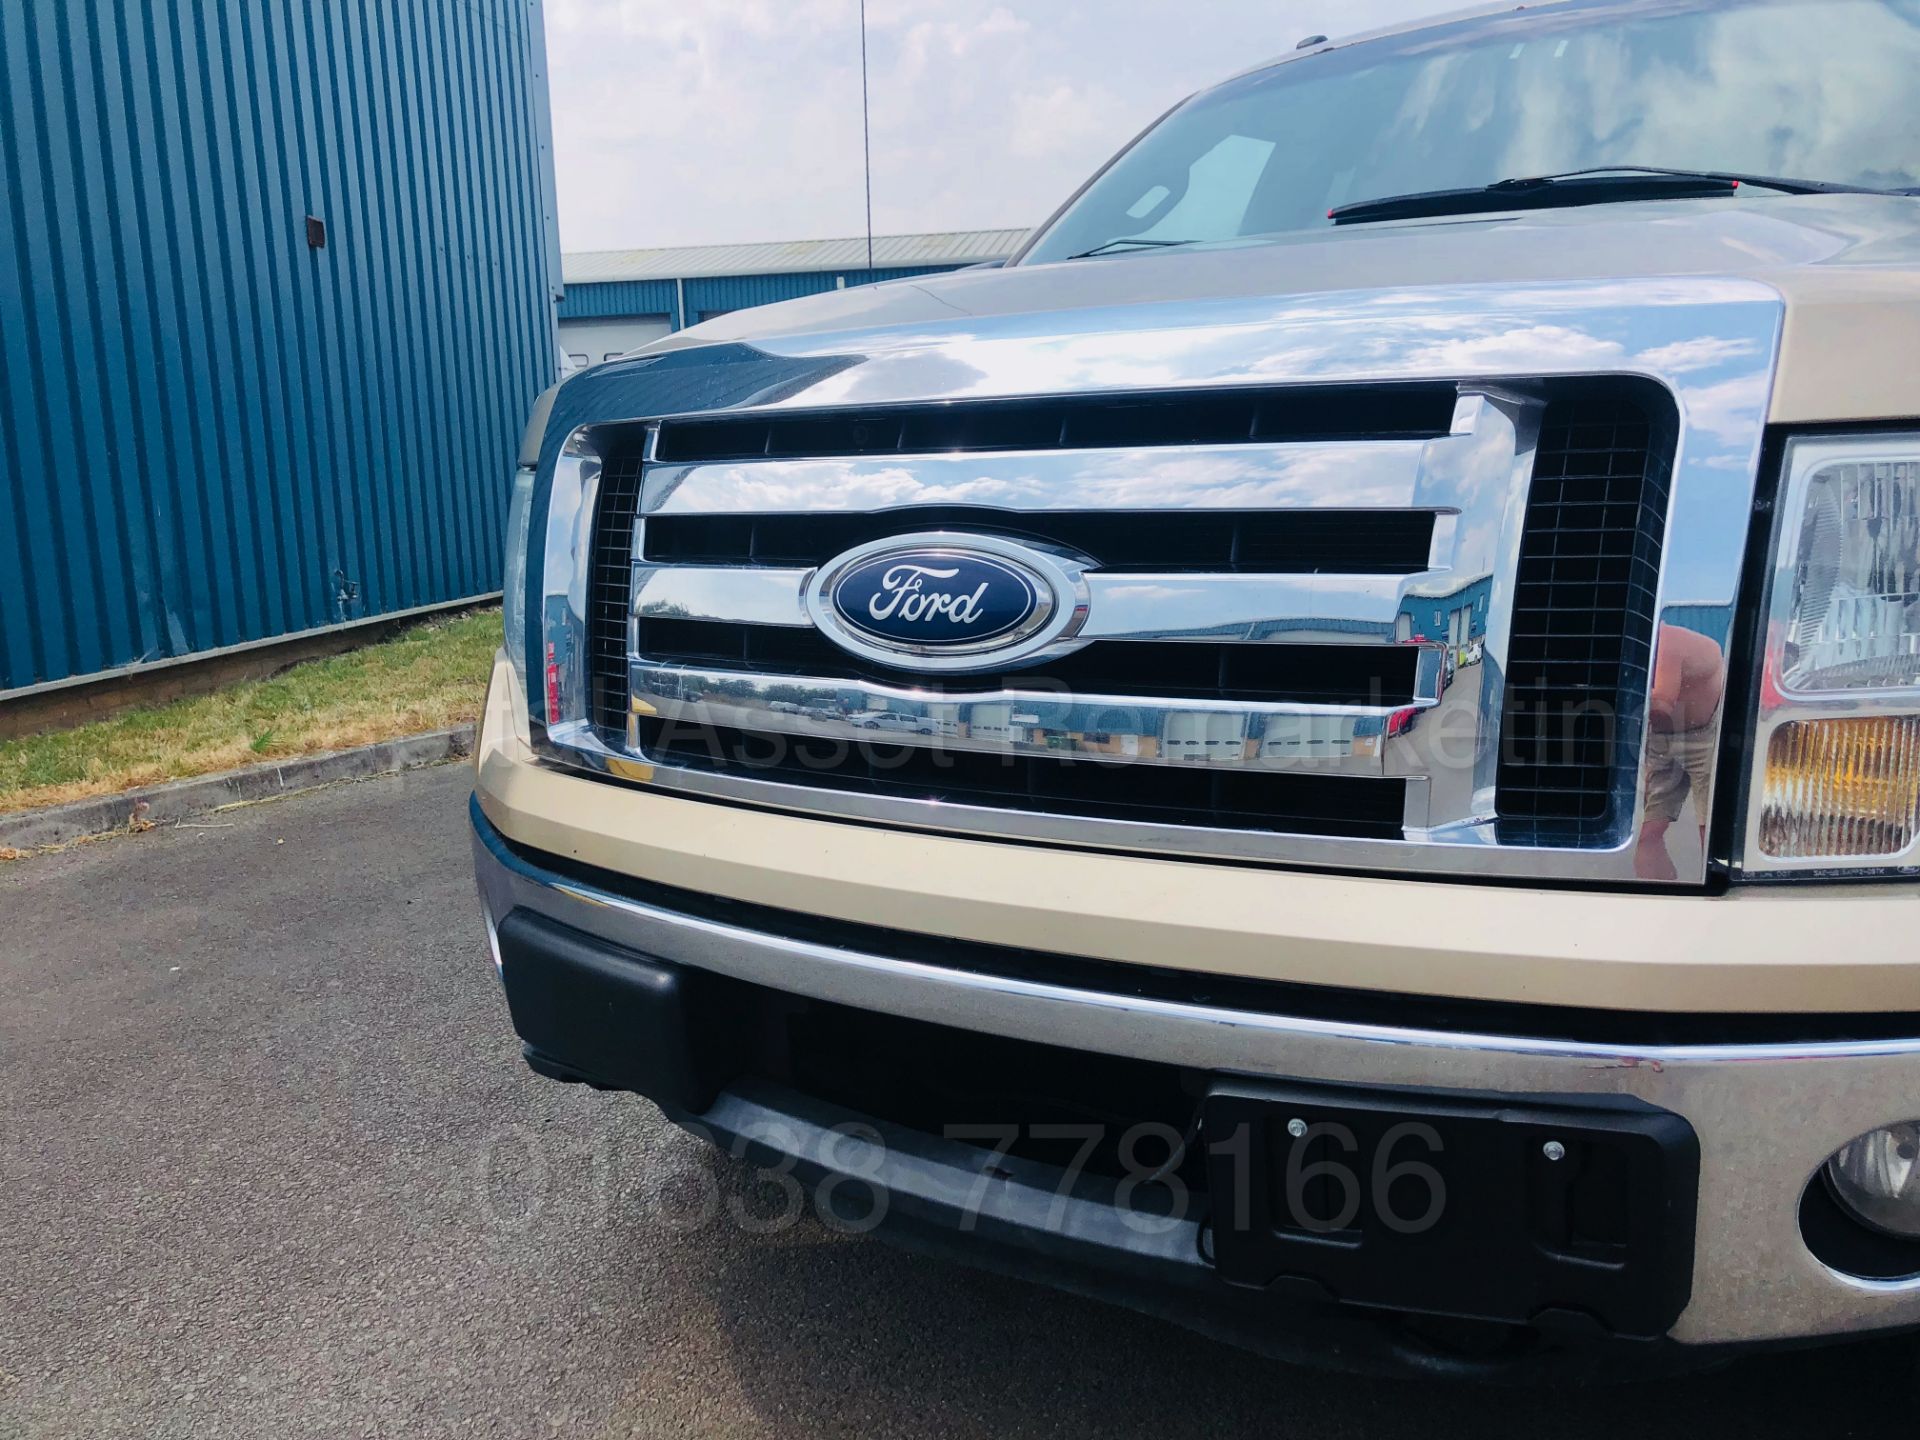 (On Sale) FORD F-150 5.4 V8 XLT EDITION KING-CAB (2012) MODEL**4X4**6 SEATER**AUTOMATIC *TOP SPEC* - Image 11 of 52